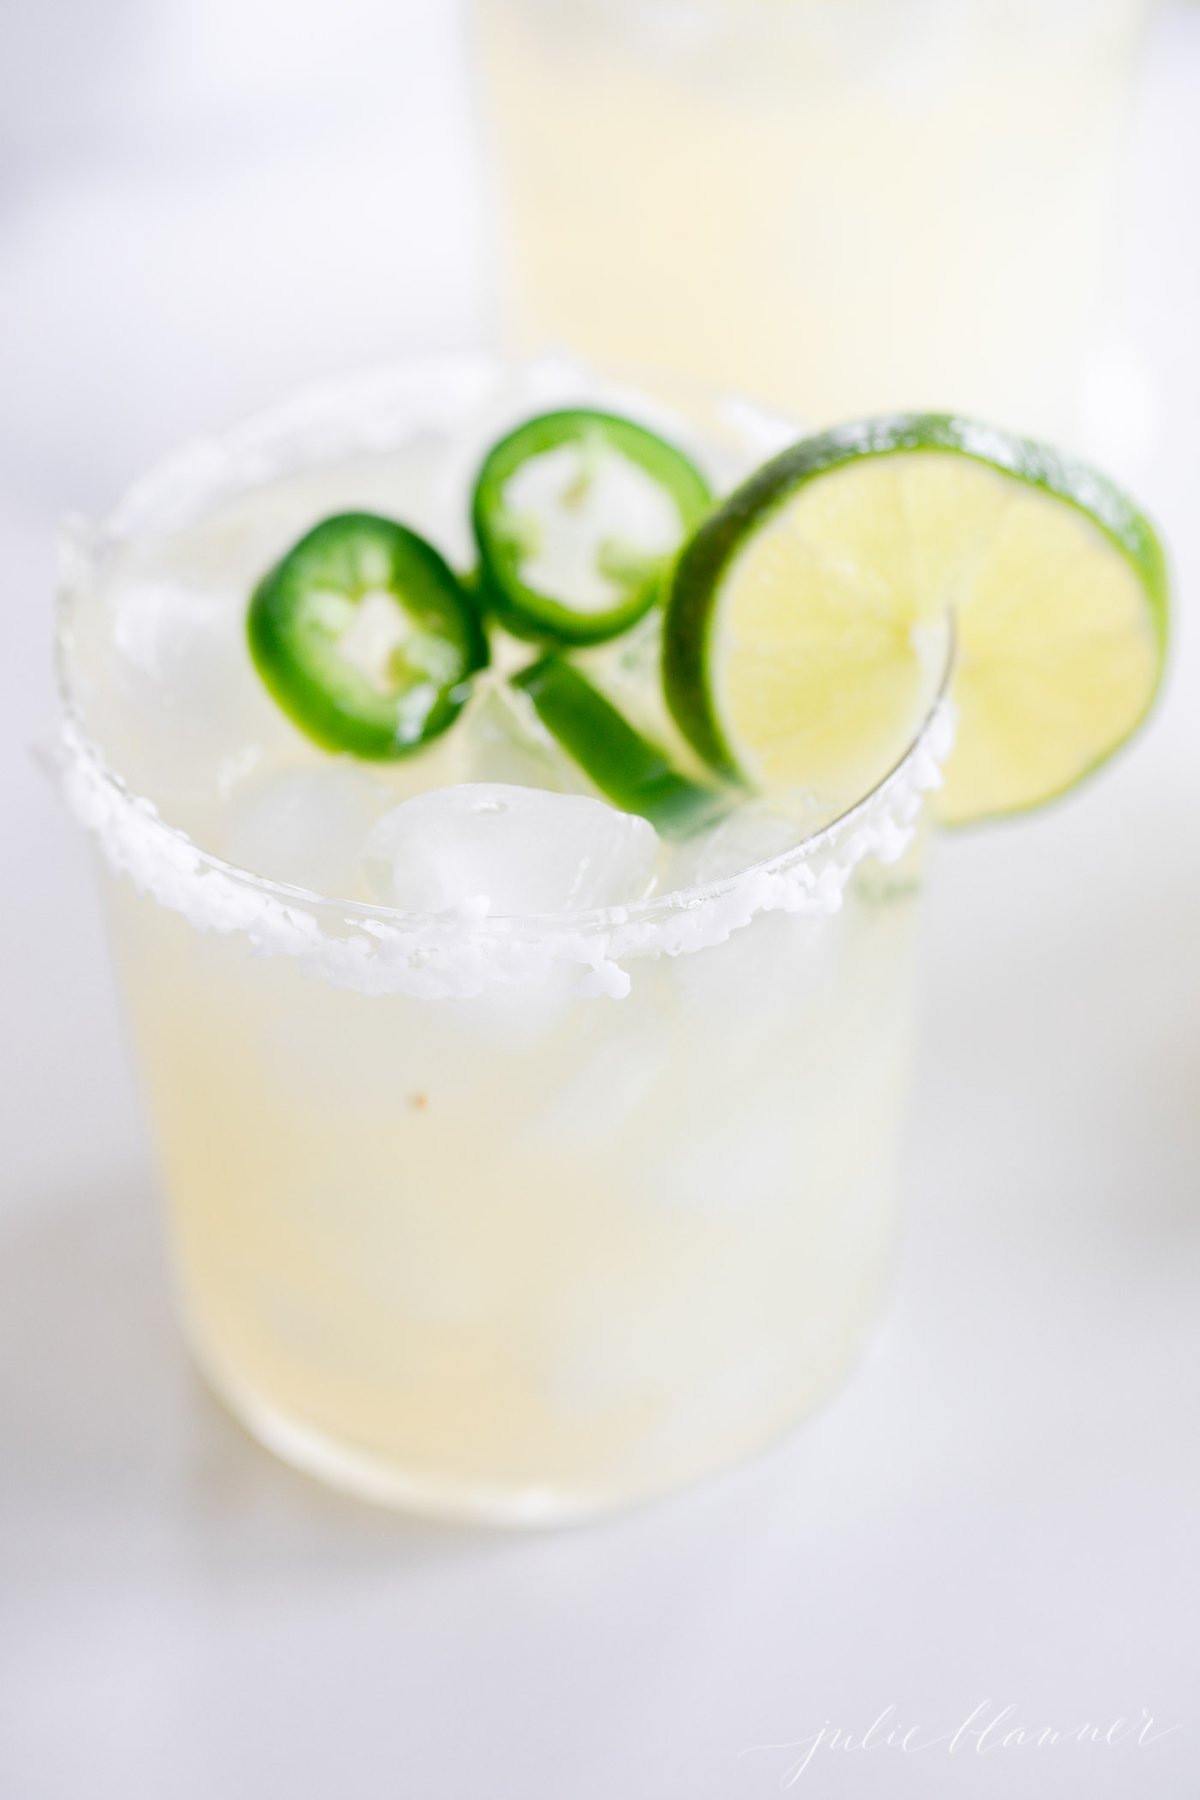 Spice up your margarita game with a fiery twist! This skinny spicy margarita recipe packs a punch with the zesty flavors of lime and jalapeno. Elevate your taste buds